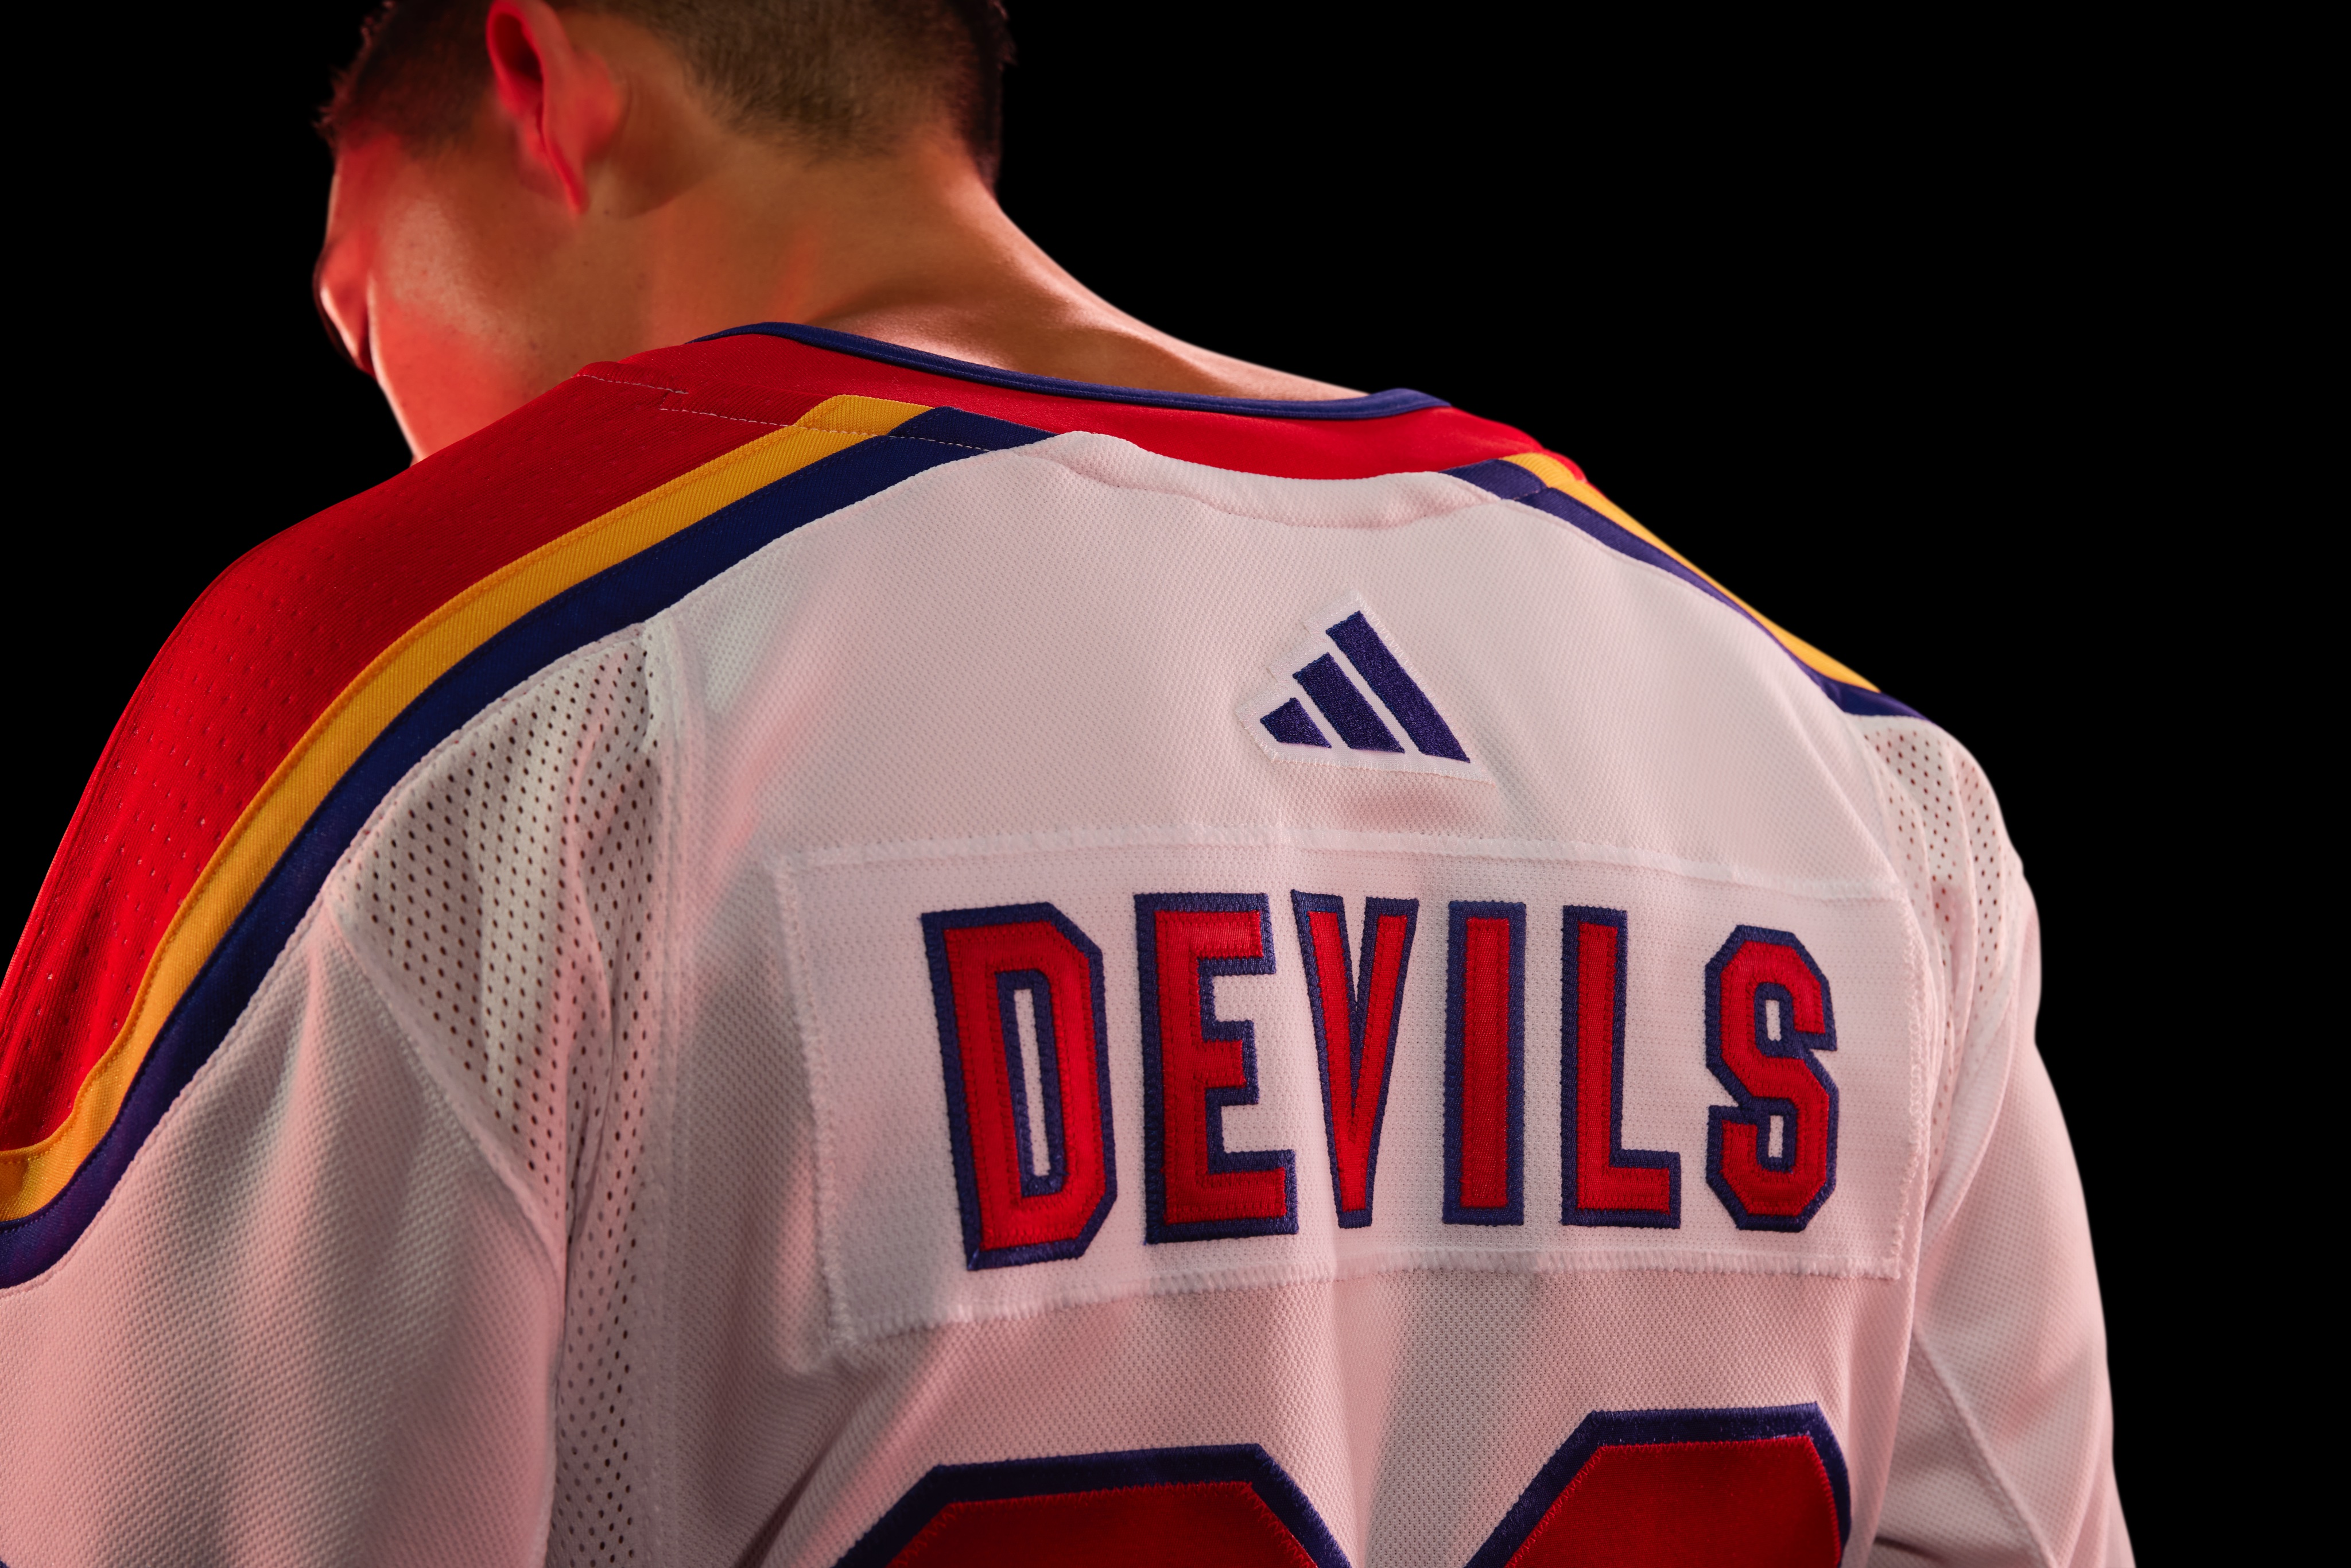 New Jersey Devils - From The Rockies to The Rock get your hands on our  #ReverseRetro jersey TODAY! On sale exclusively at adidas.com &  NHLShop.com, as well as the Devils Den team